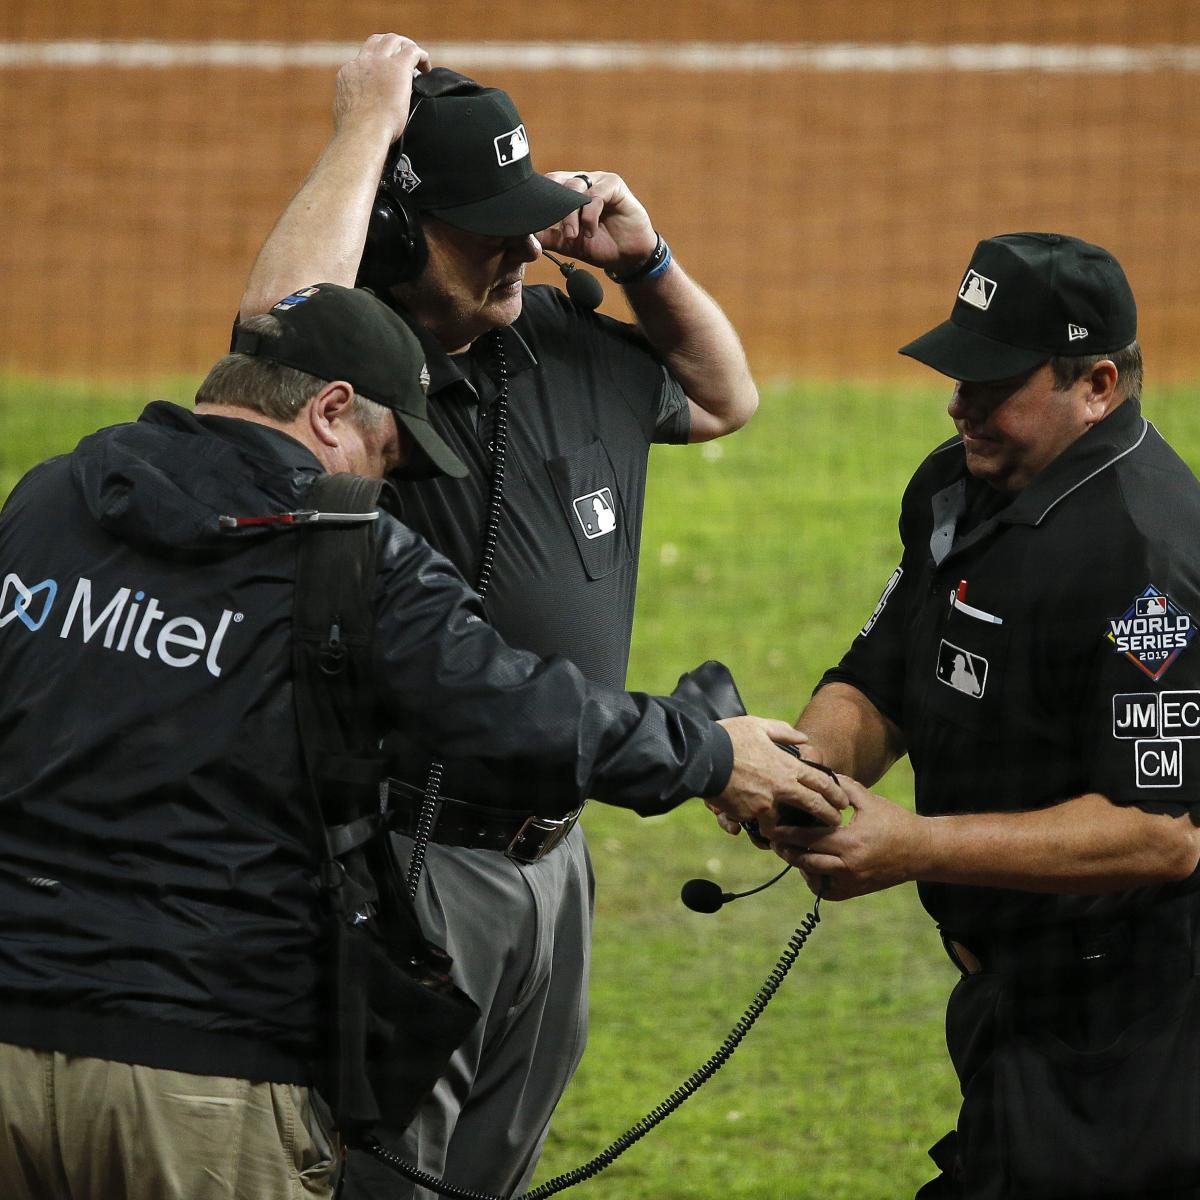 MLB Umpires to Explain Replay Review Decisions Via Microphone for 2020